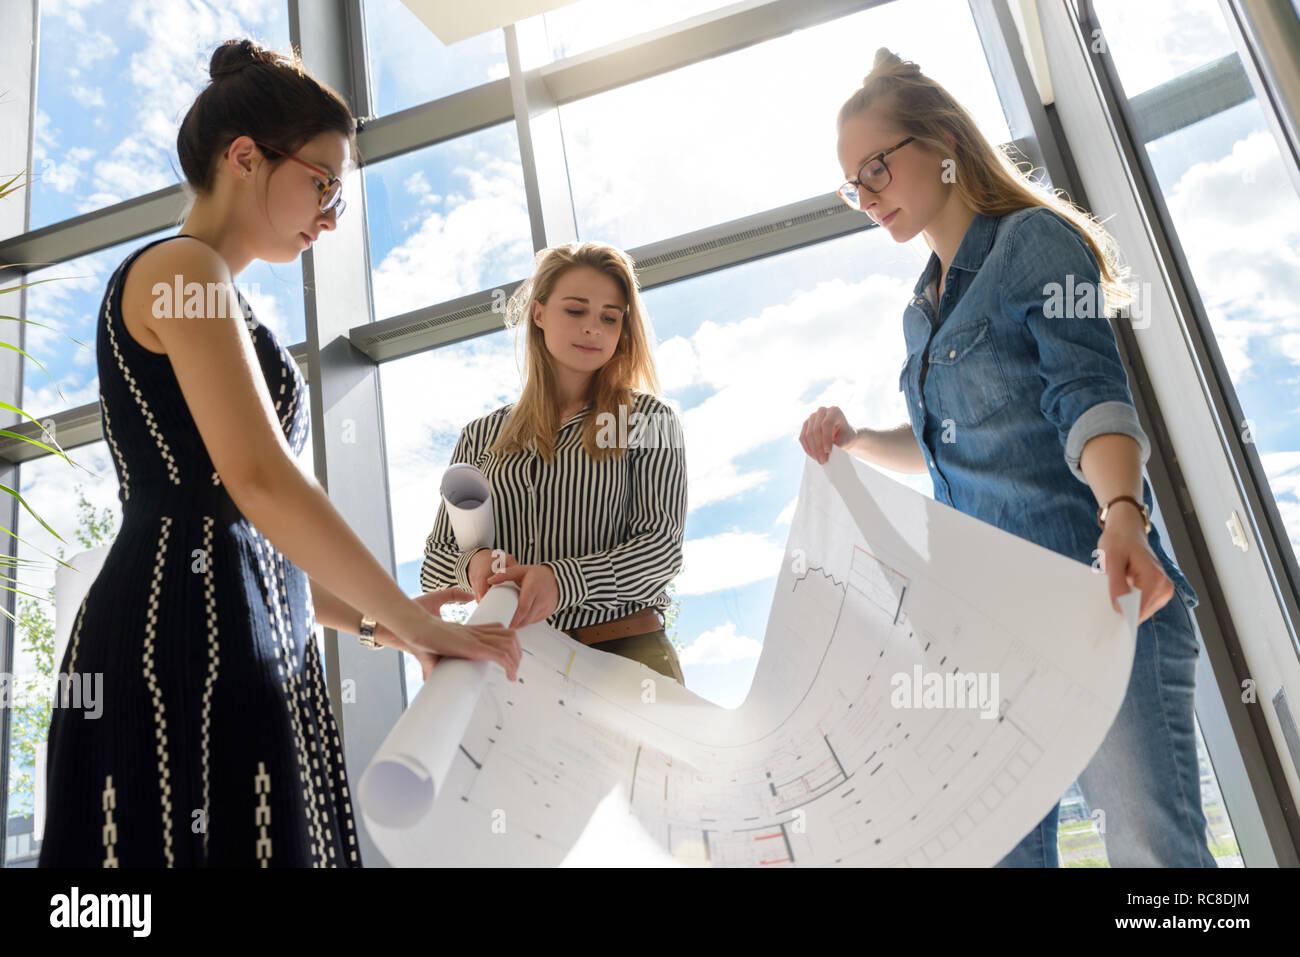 Colleagues rolling up charts after brainstorming Stock Photo